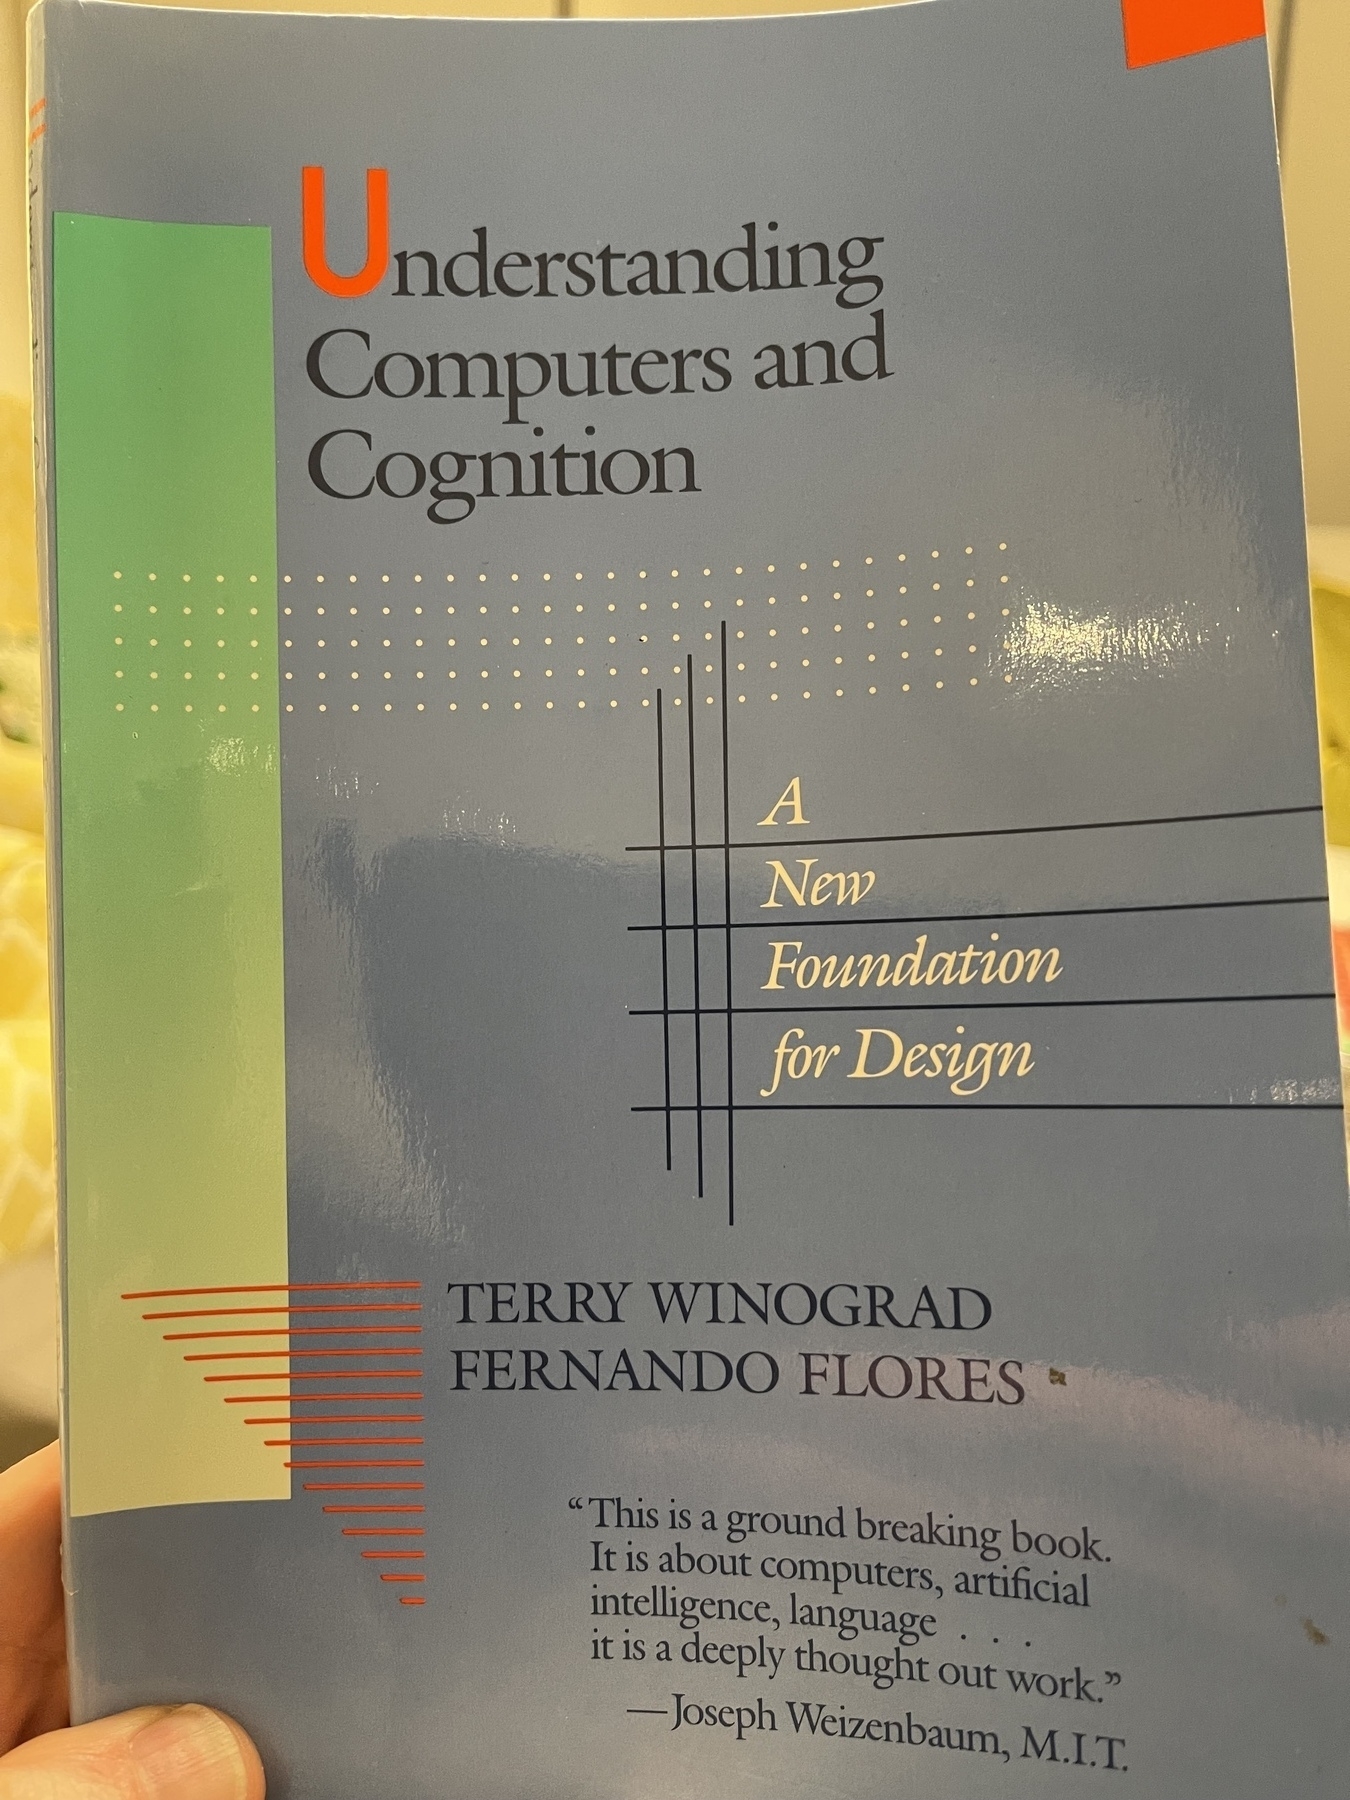 Understanding Computers & Cognition by Terry Winograd and Fernando Flores.